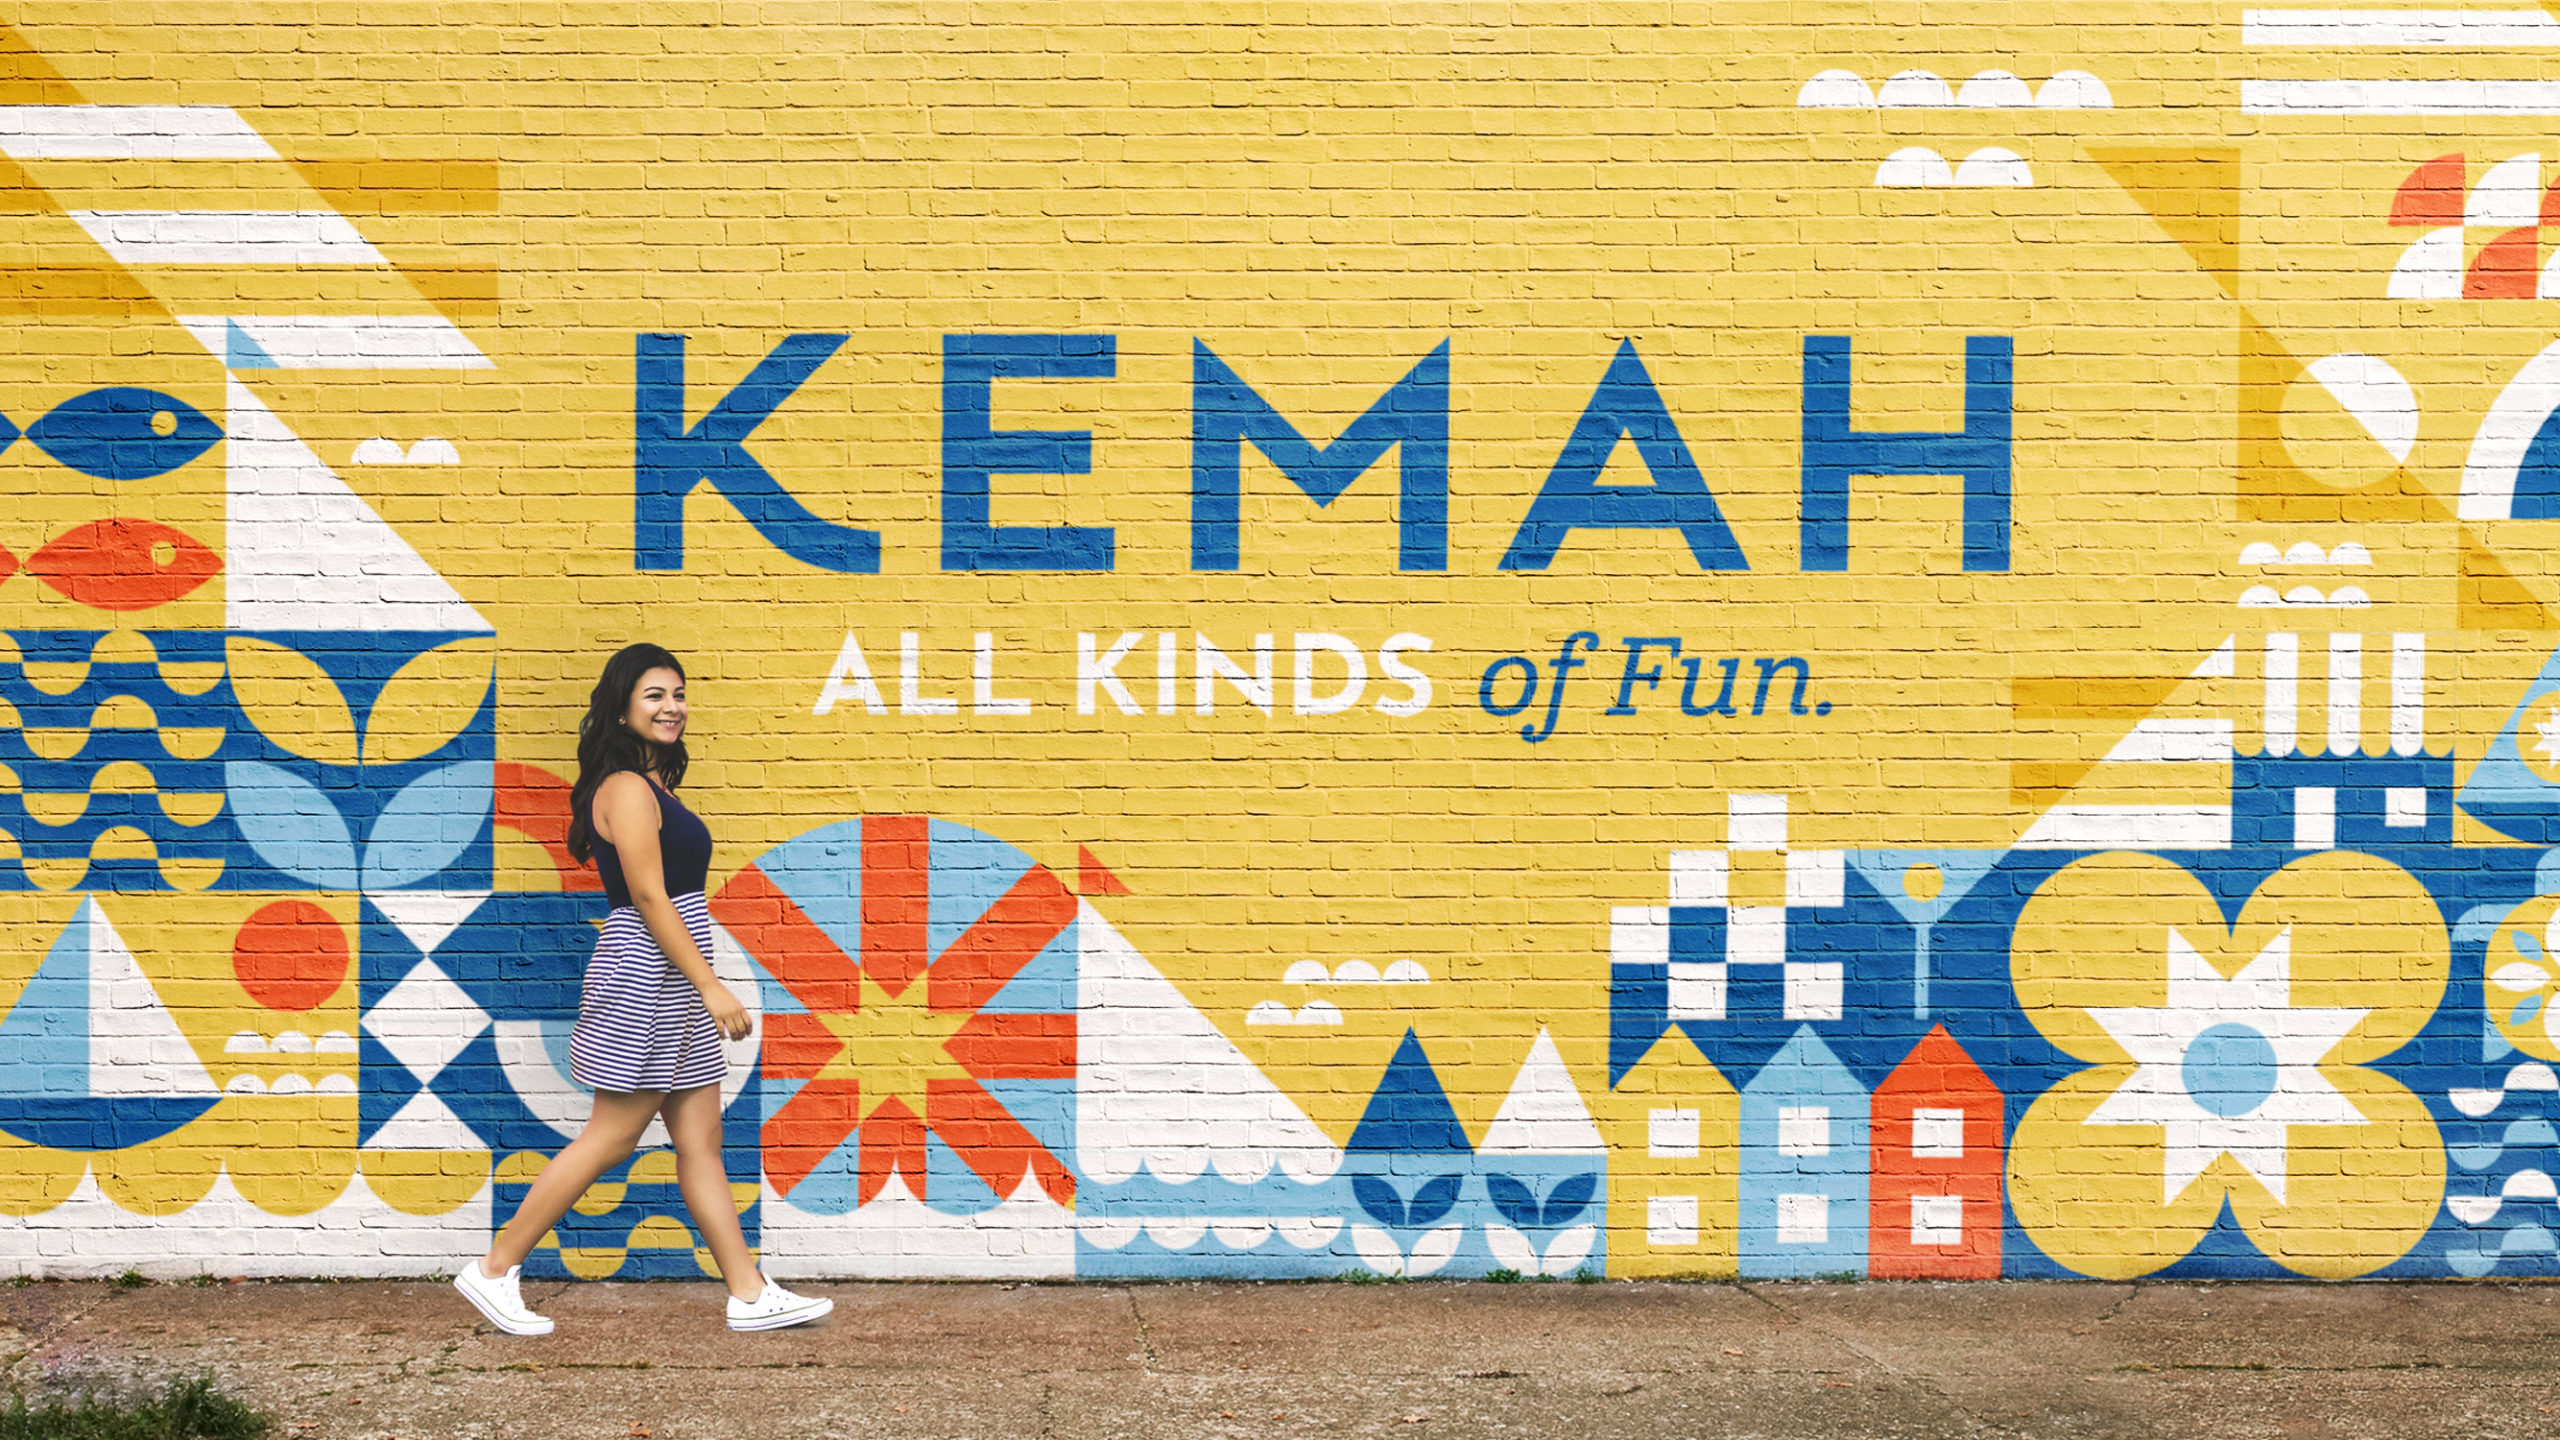 Showing a wall mural painted with the Kemah branding. Branding designed by MDR. Kemah is a small coastal town just outside of Houston.